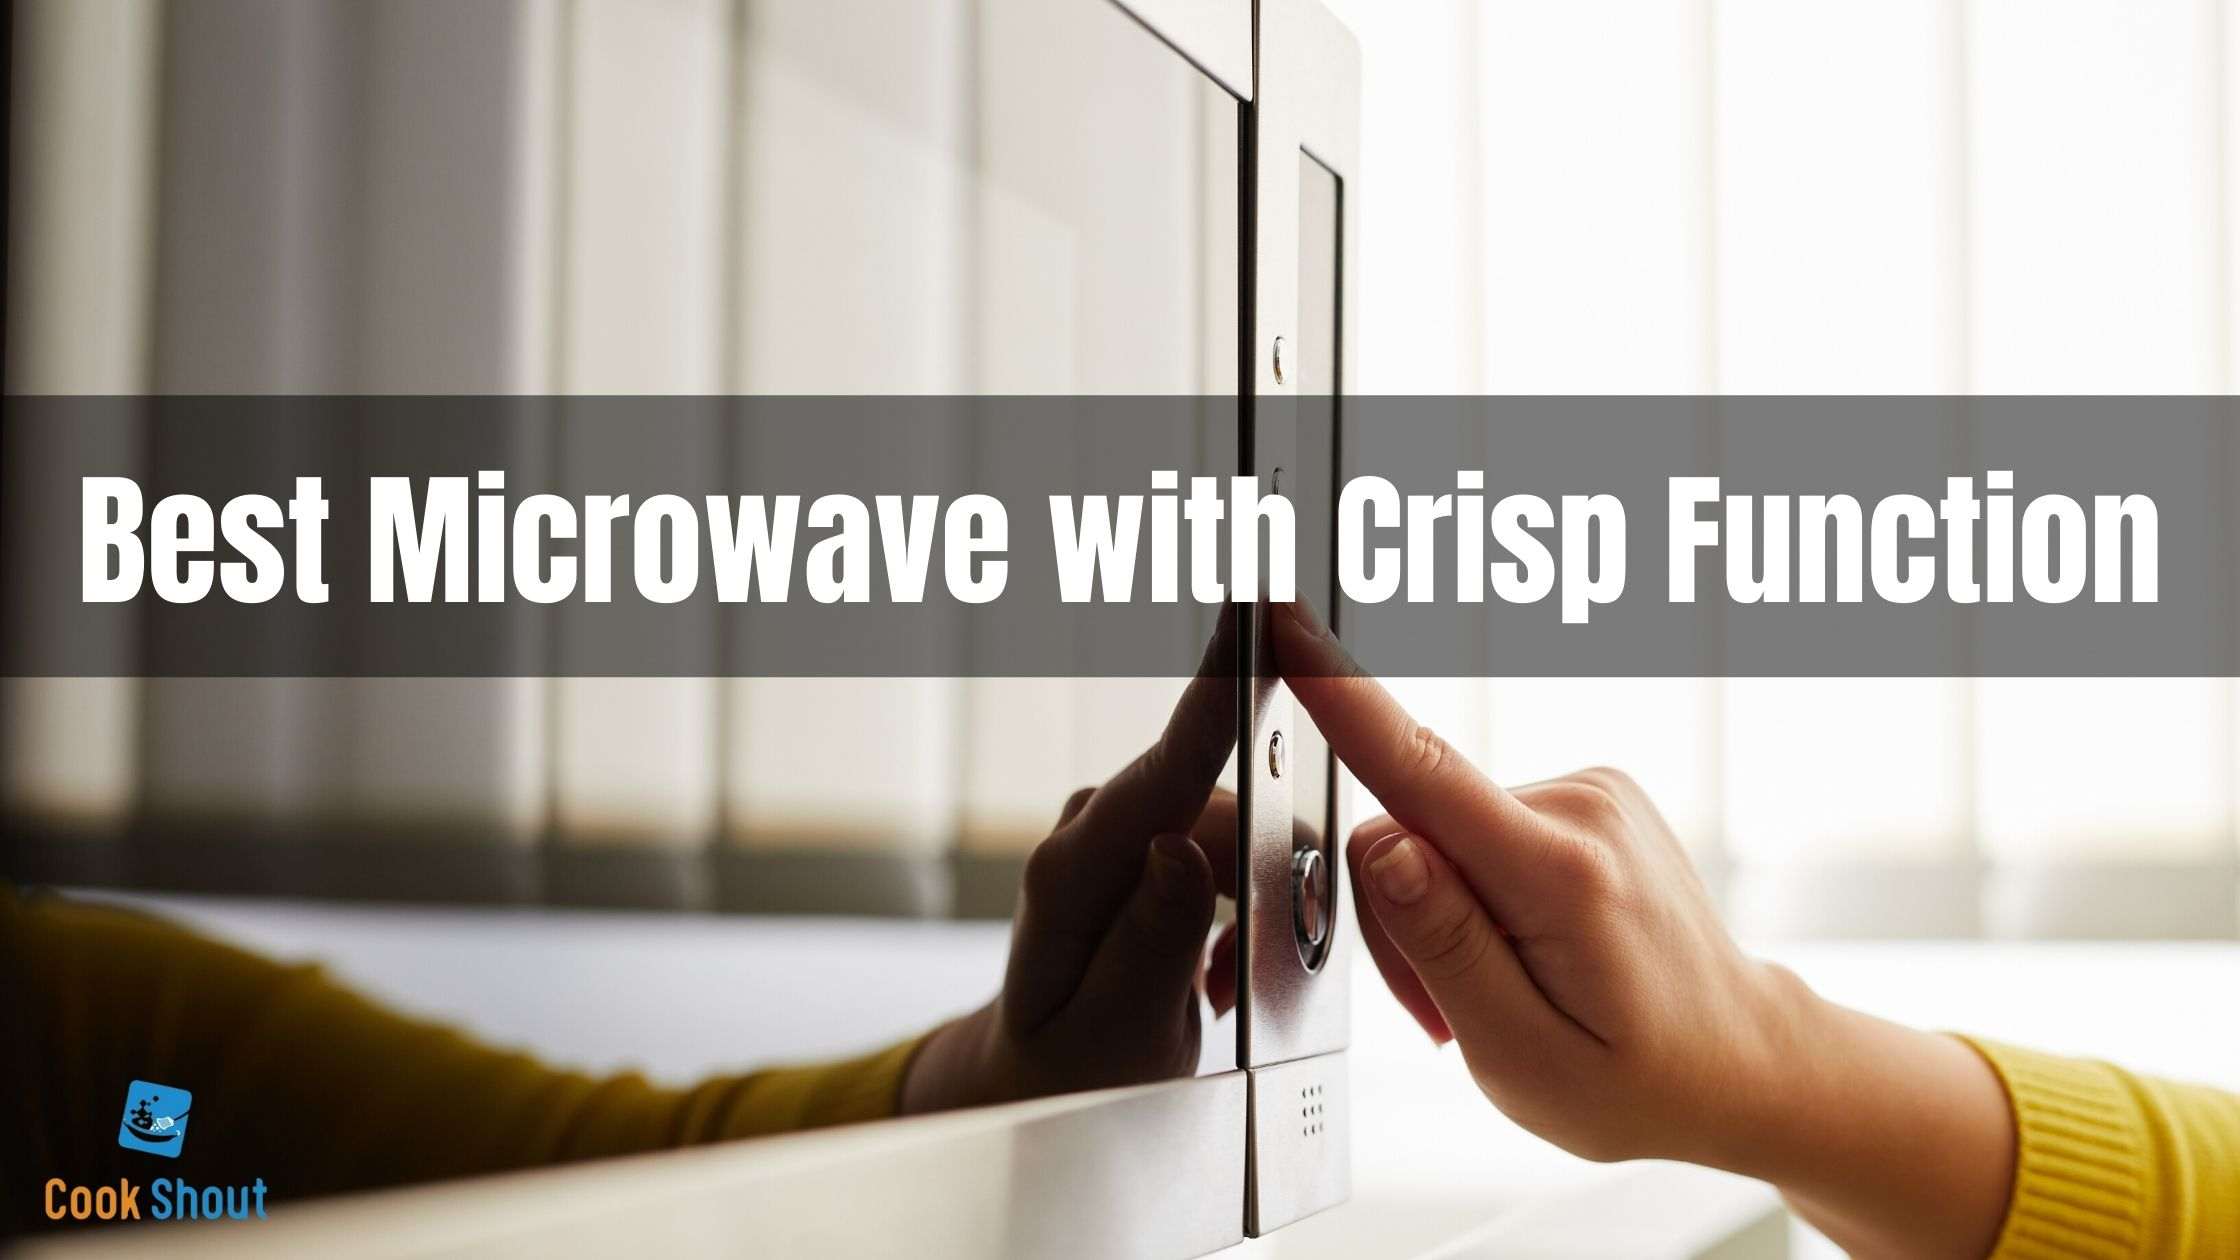 Best Microwave with Crisp Function In 2021